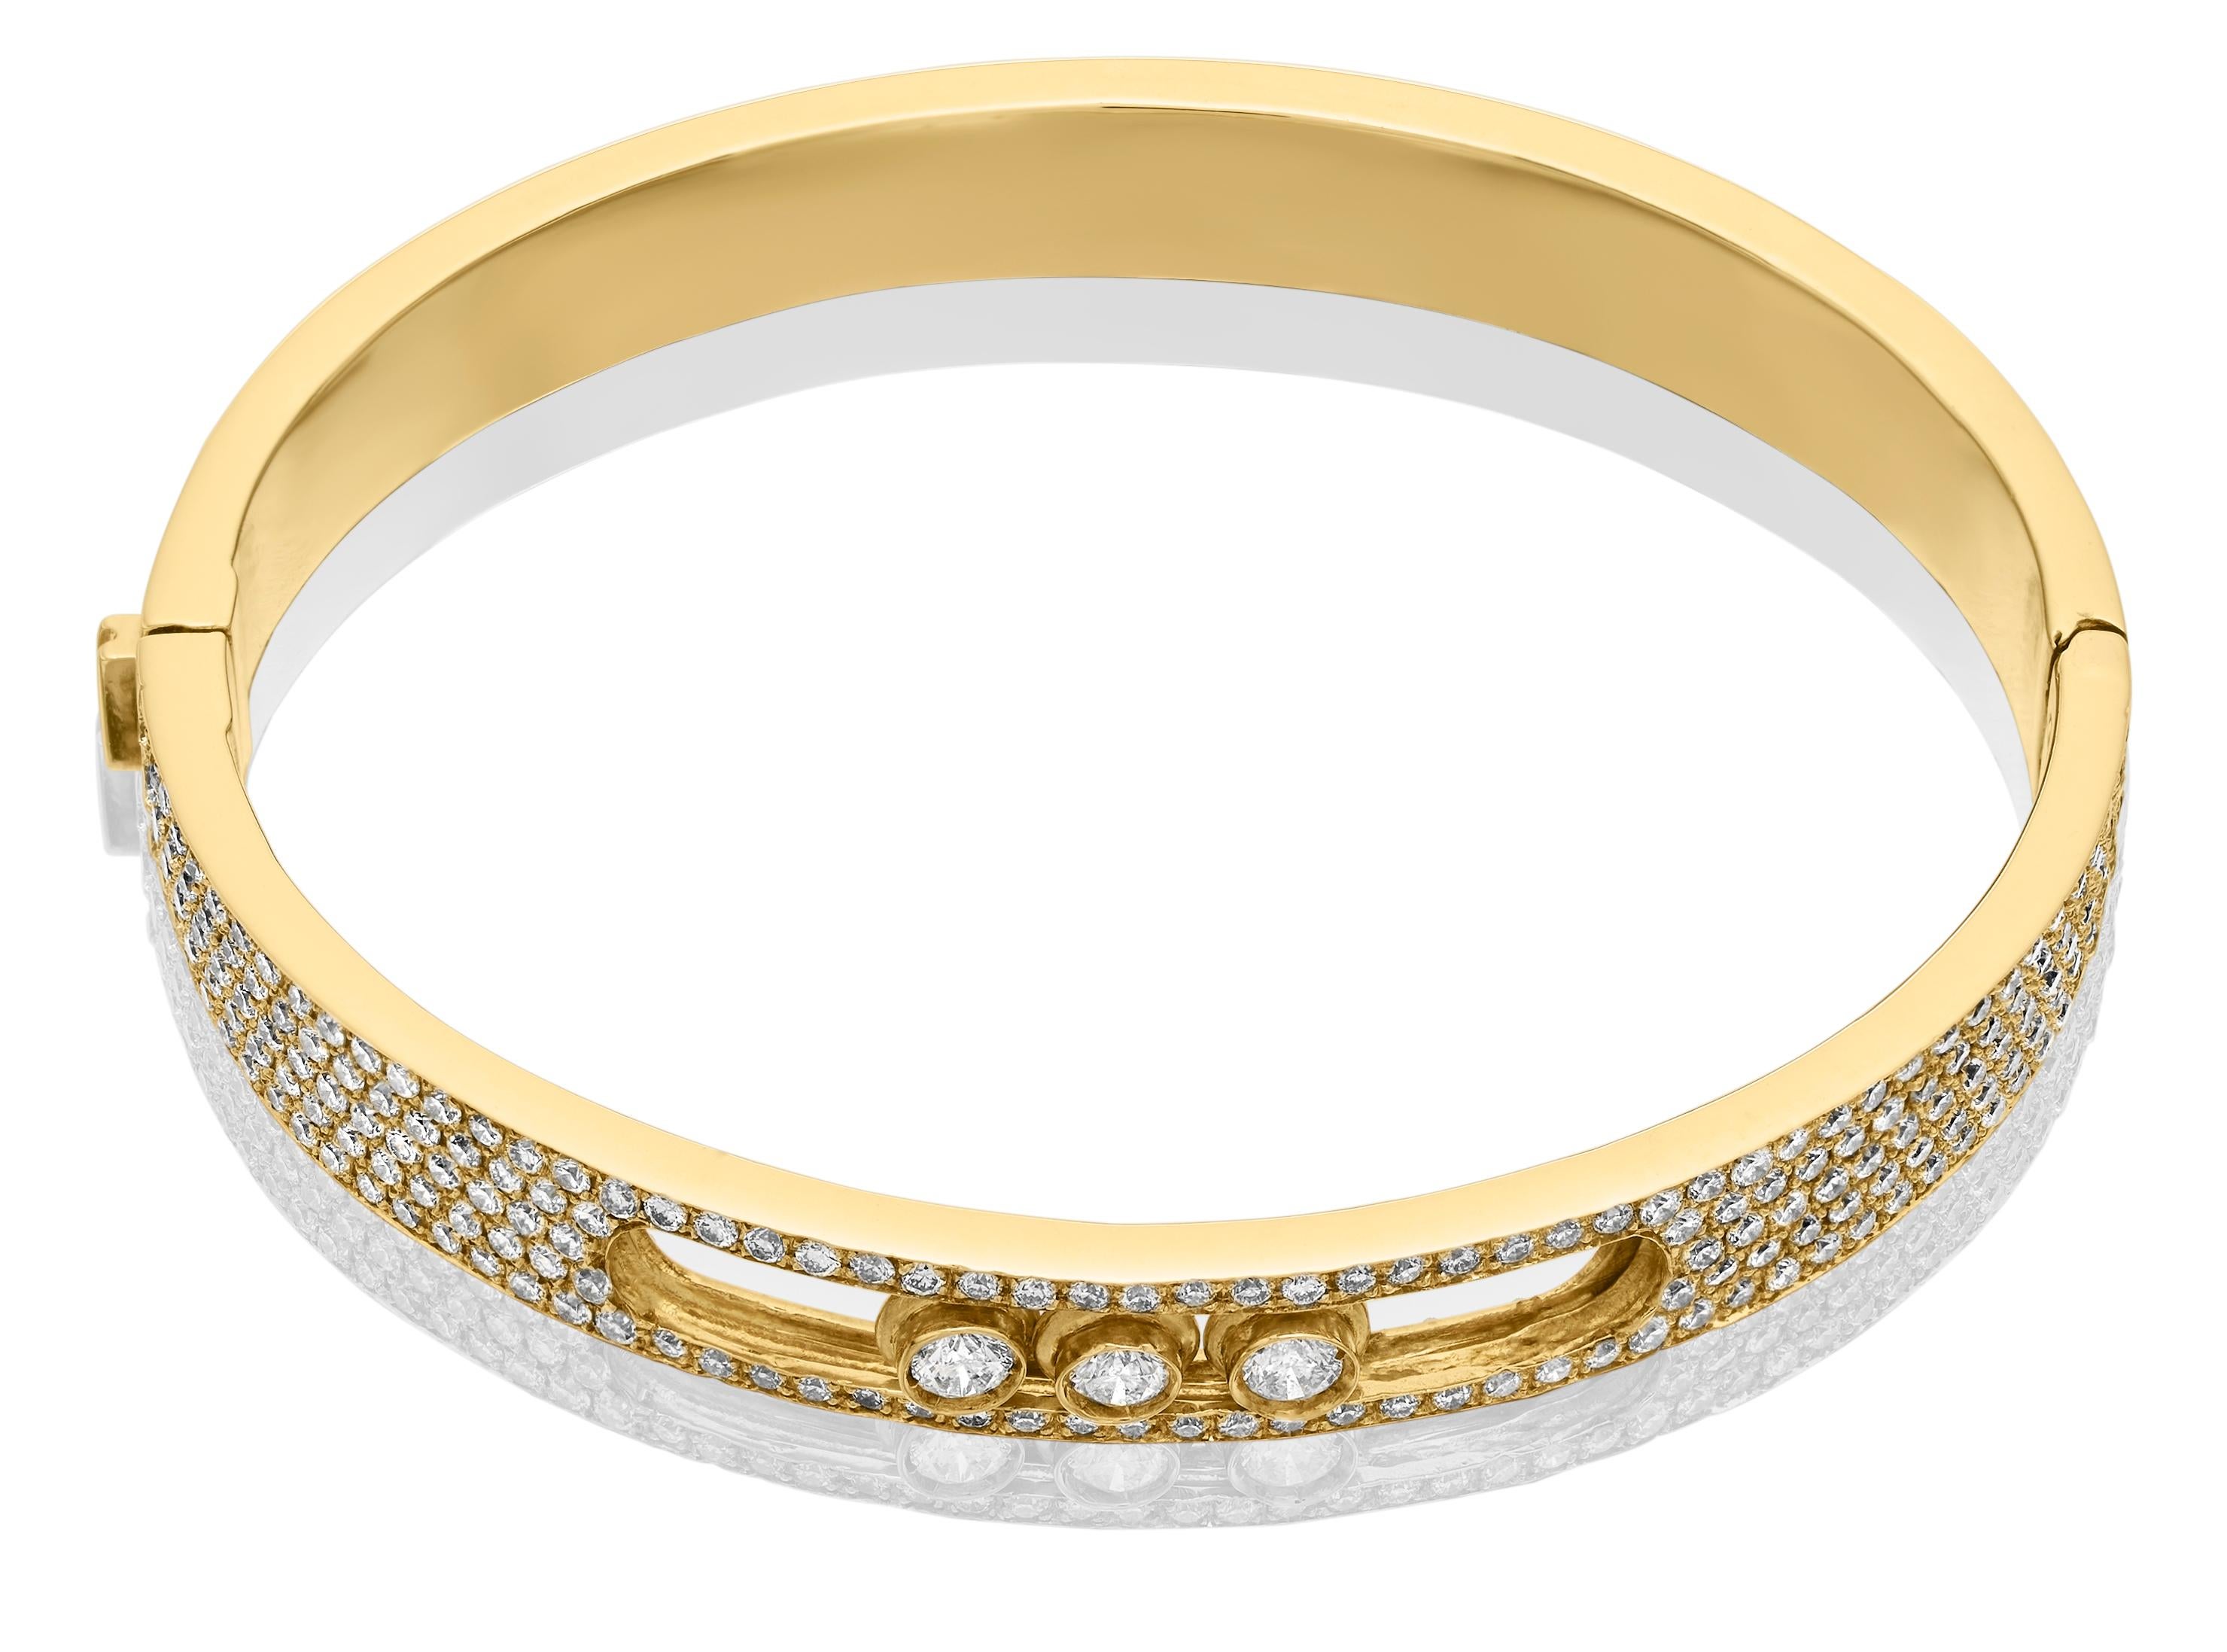 'Yessayan' Designer Moving Diamond Bangle in 18ct Yellow Gold For Sale 1